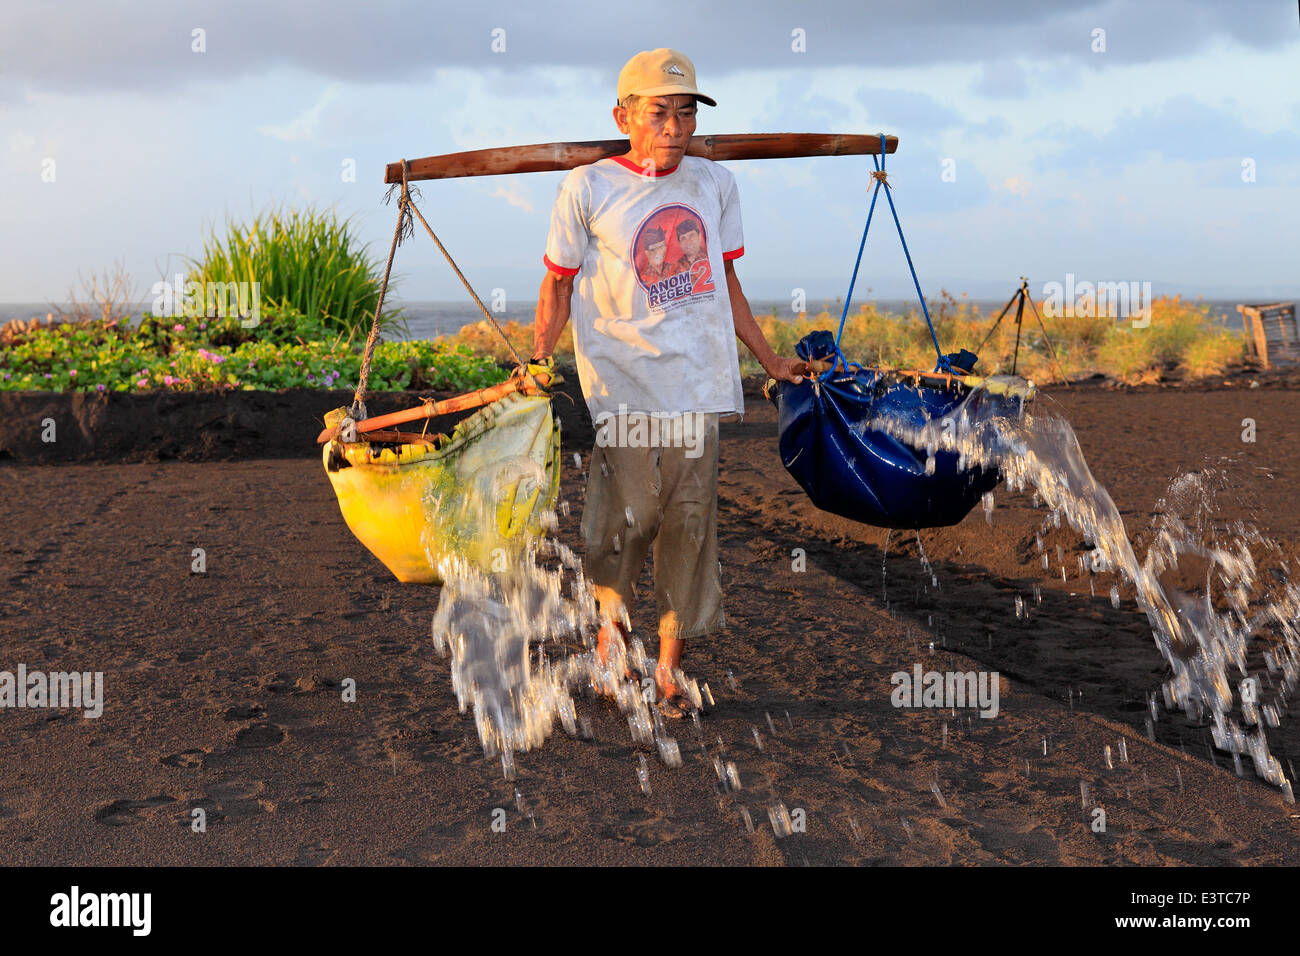 One of the few remaining traditional salt makers in Bali, at Kusamba Beach. Bali, Indonesia. Stock Photo